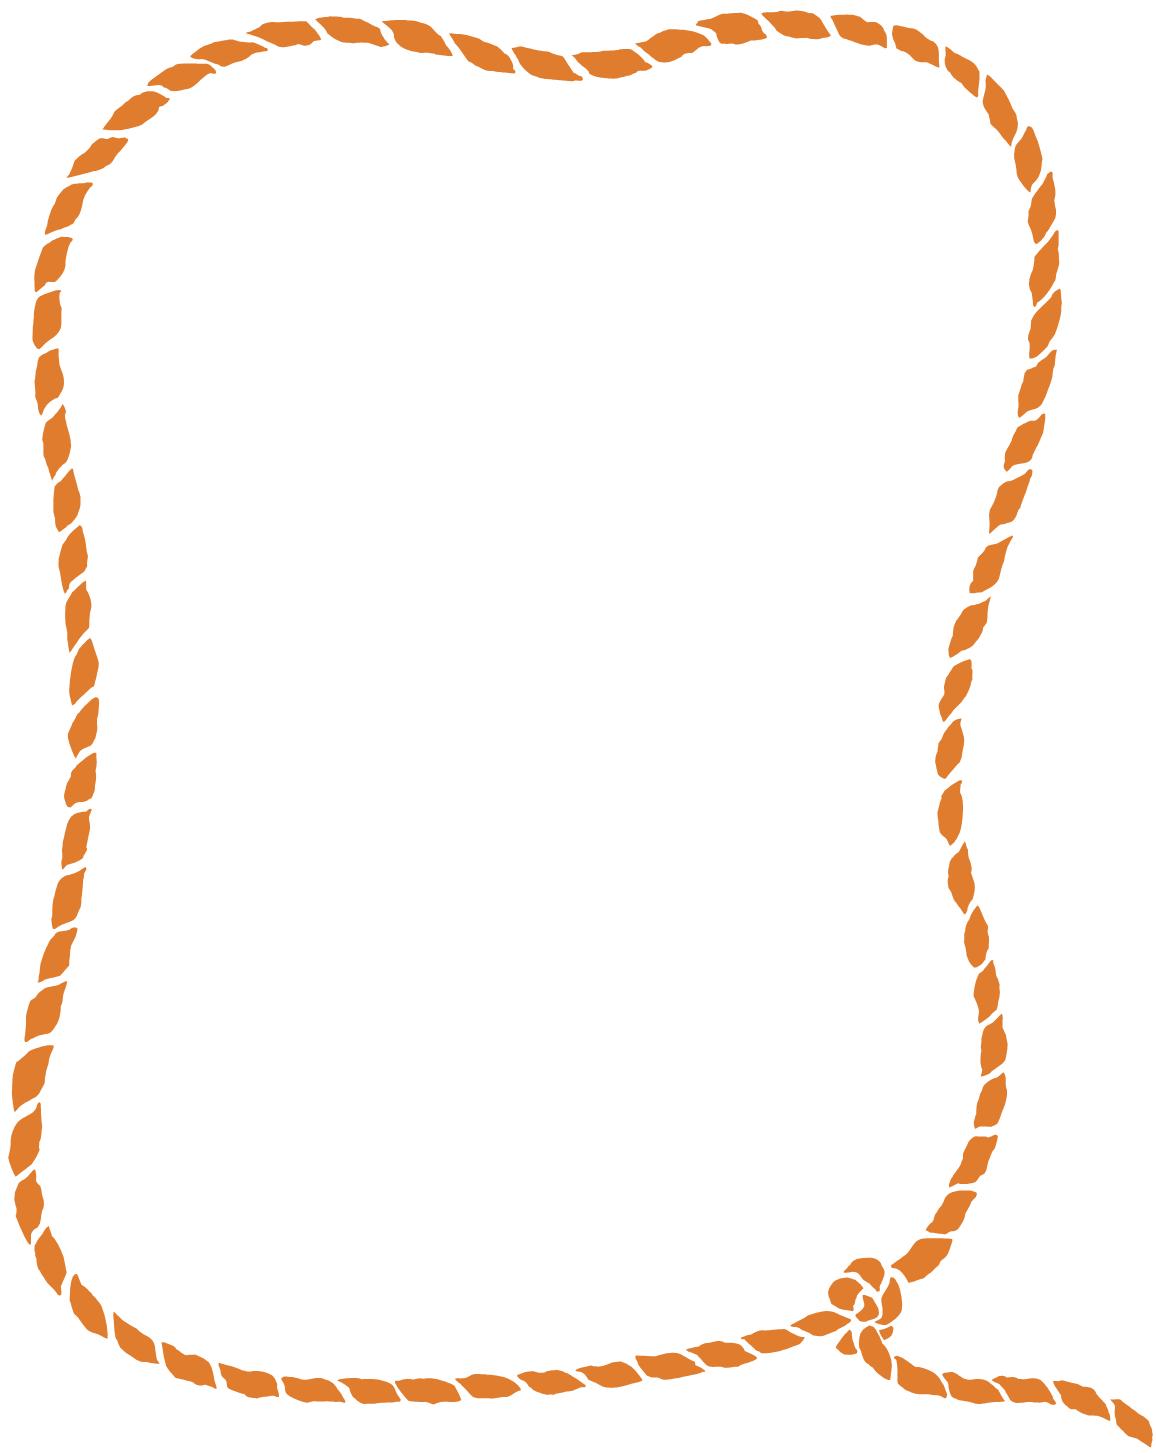 Rope Border - ClipArt Best